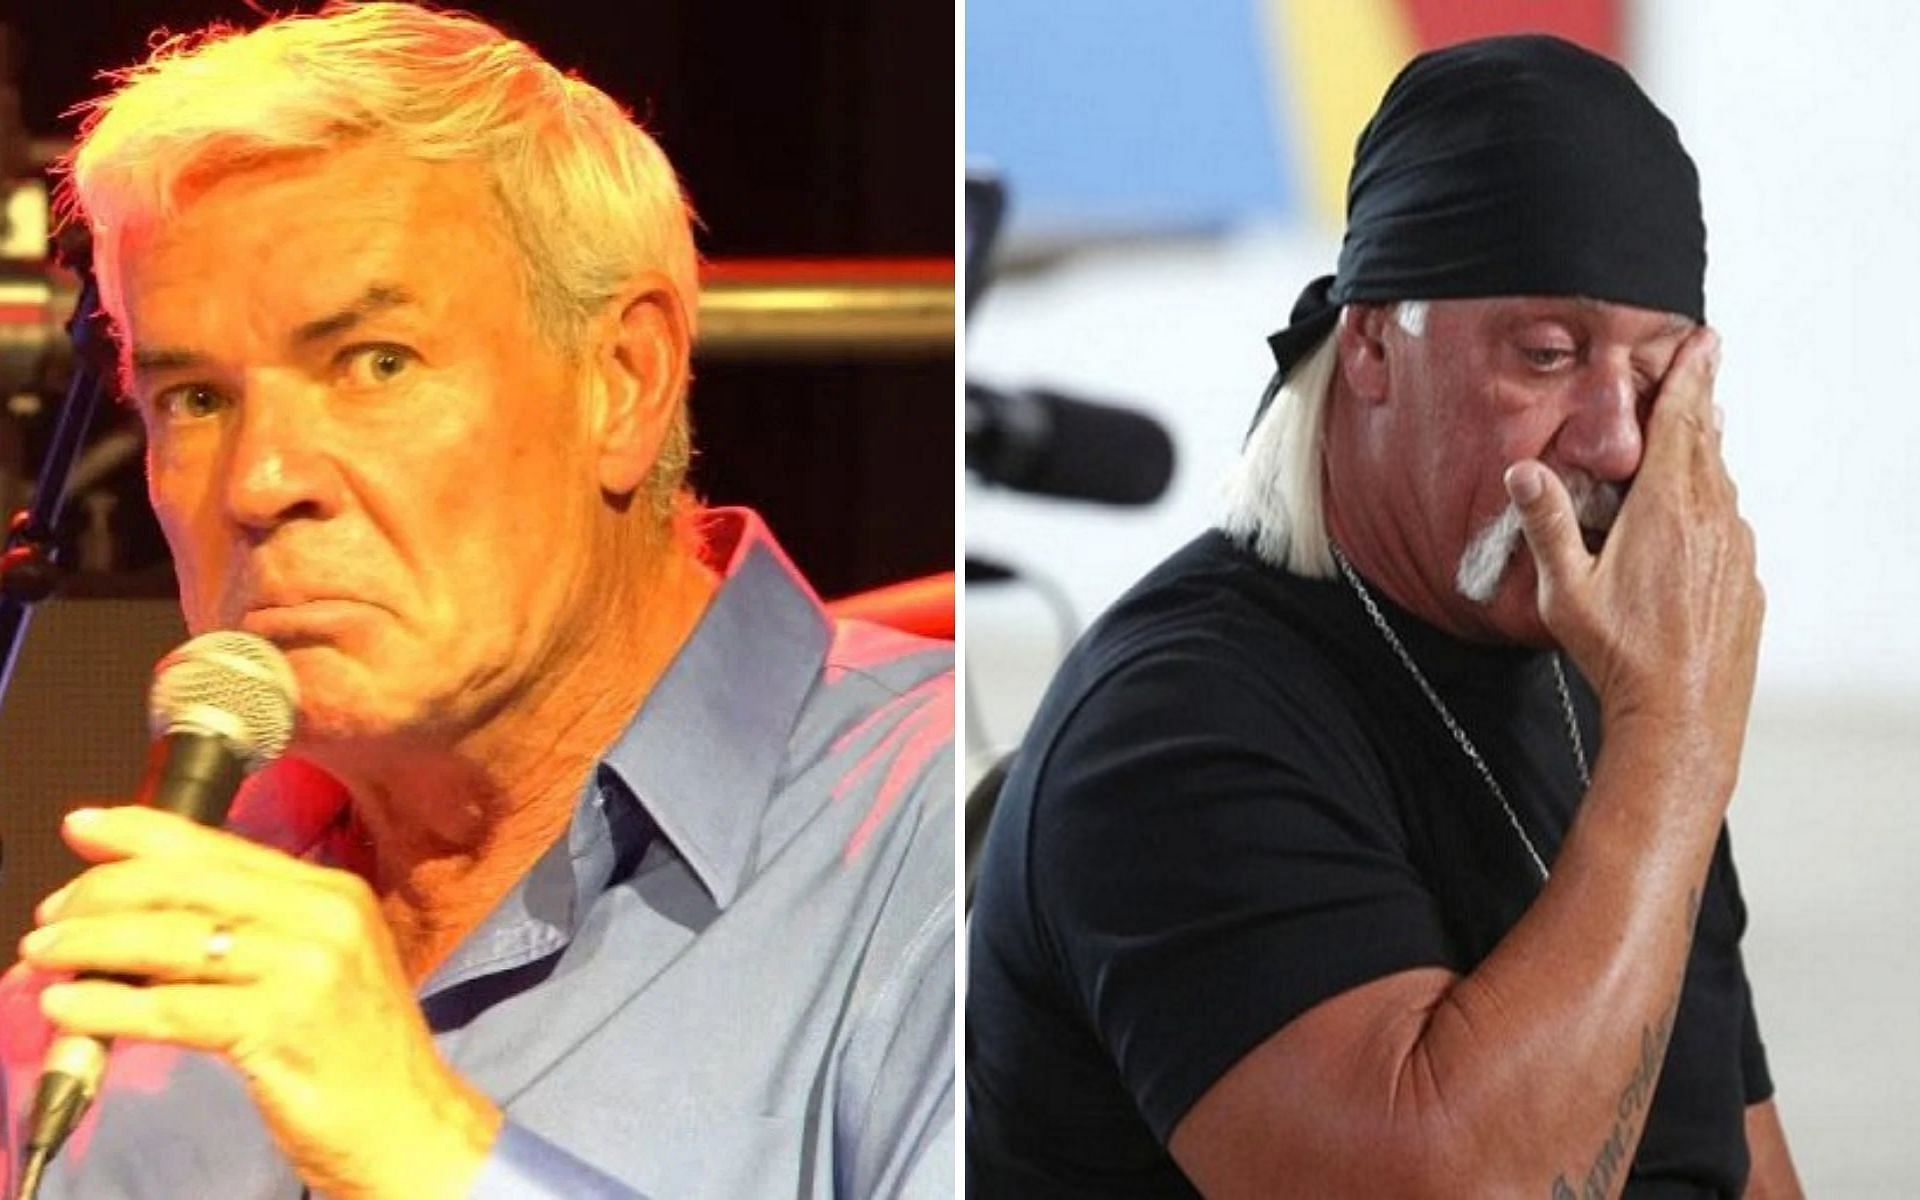 The former RAW General Manager had a close relationship with Hulk Hogan